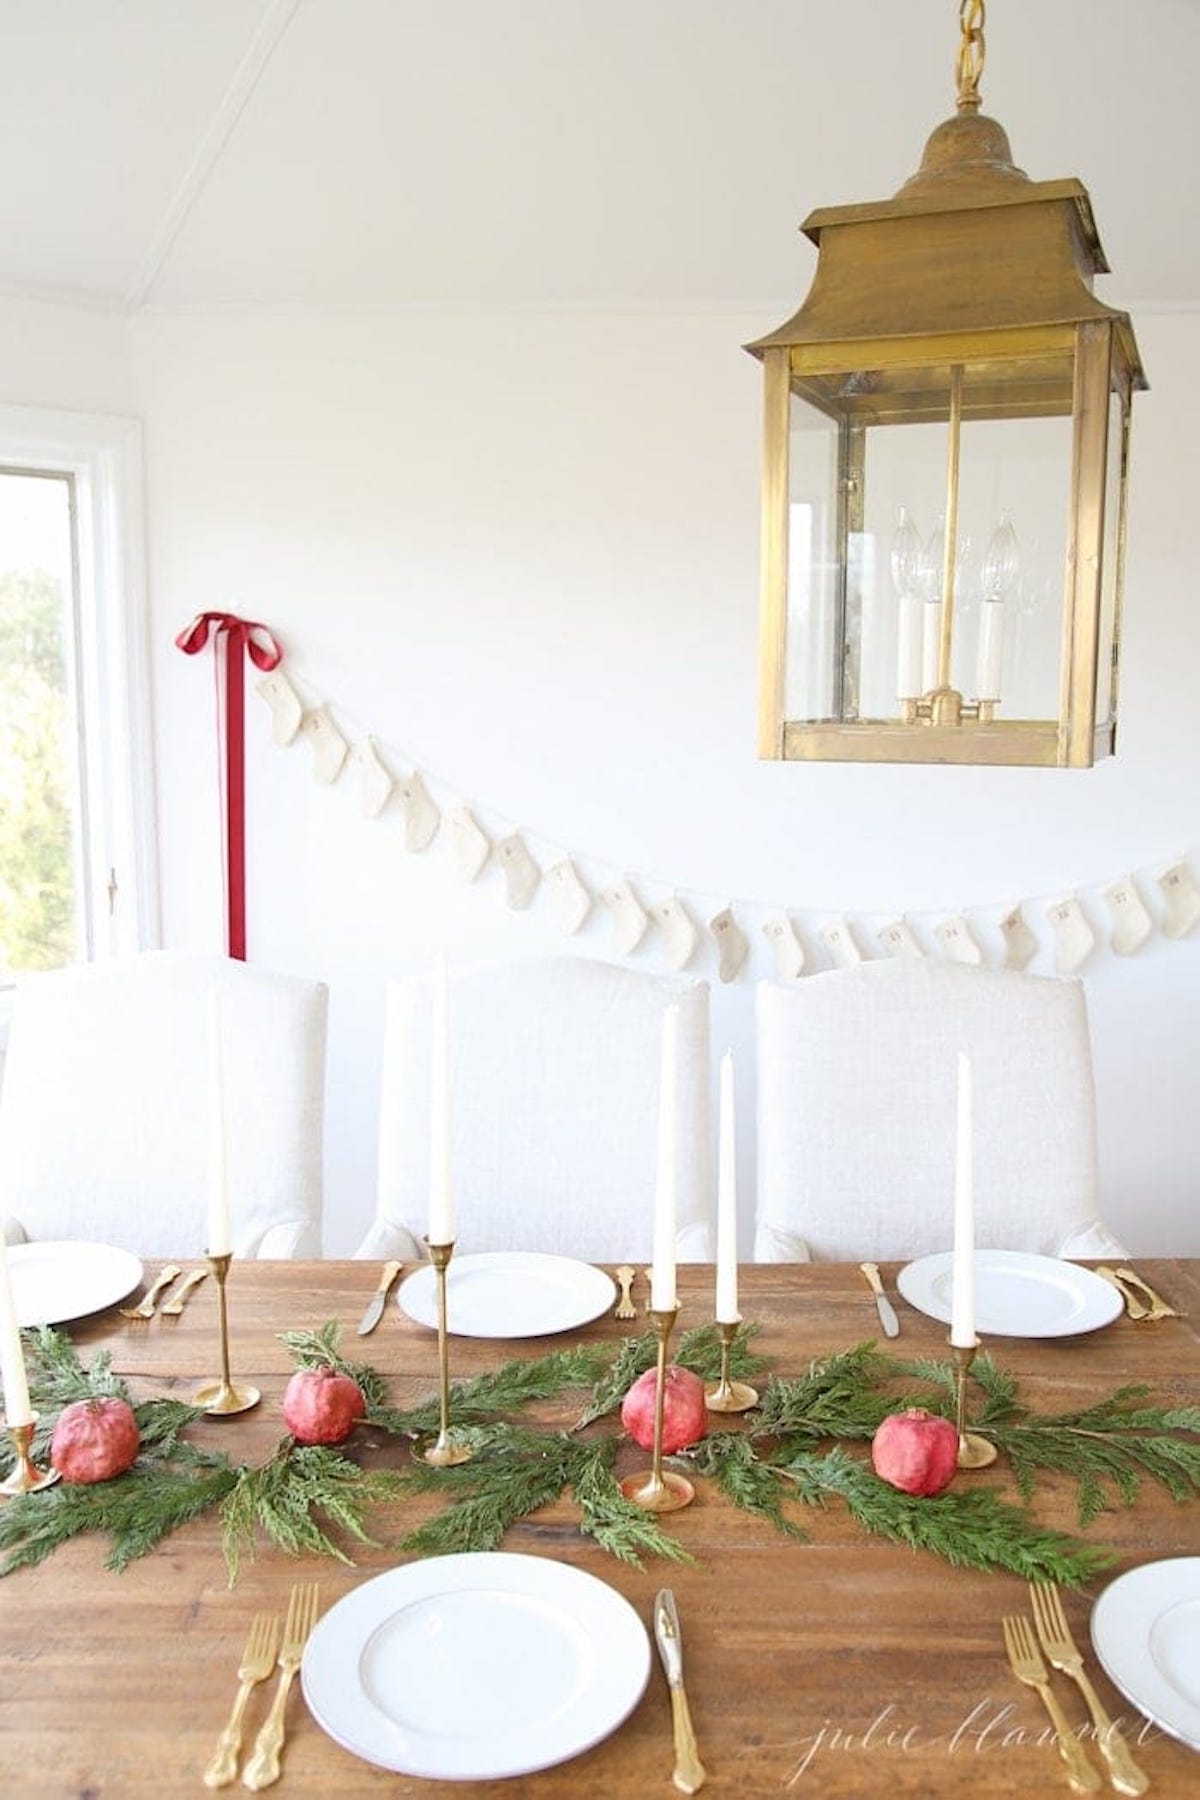 A festive Christmas table setting adorned with a charming lantern centerpiece and beautifully arranged place settings.